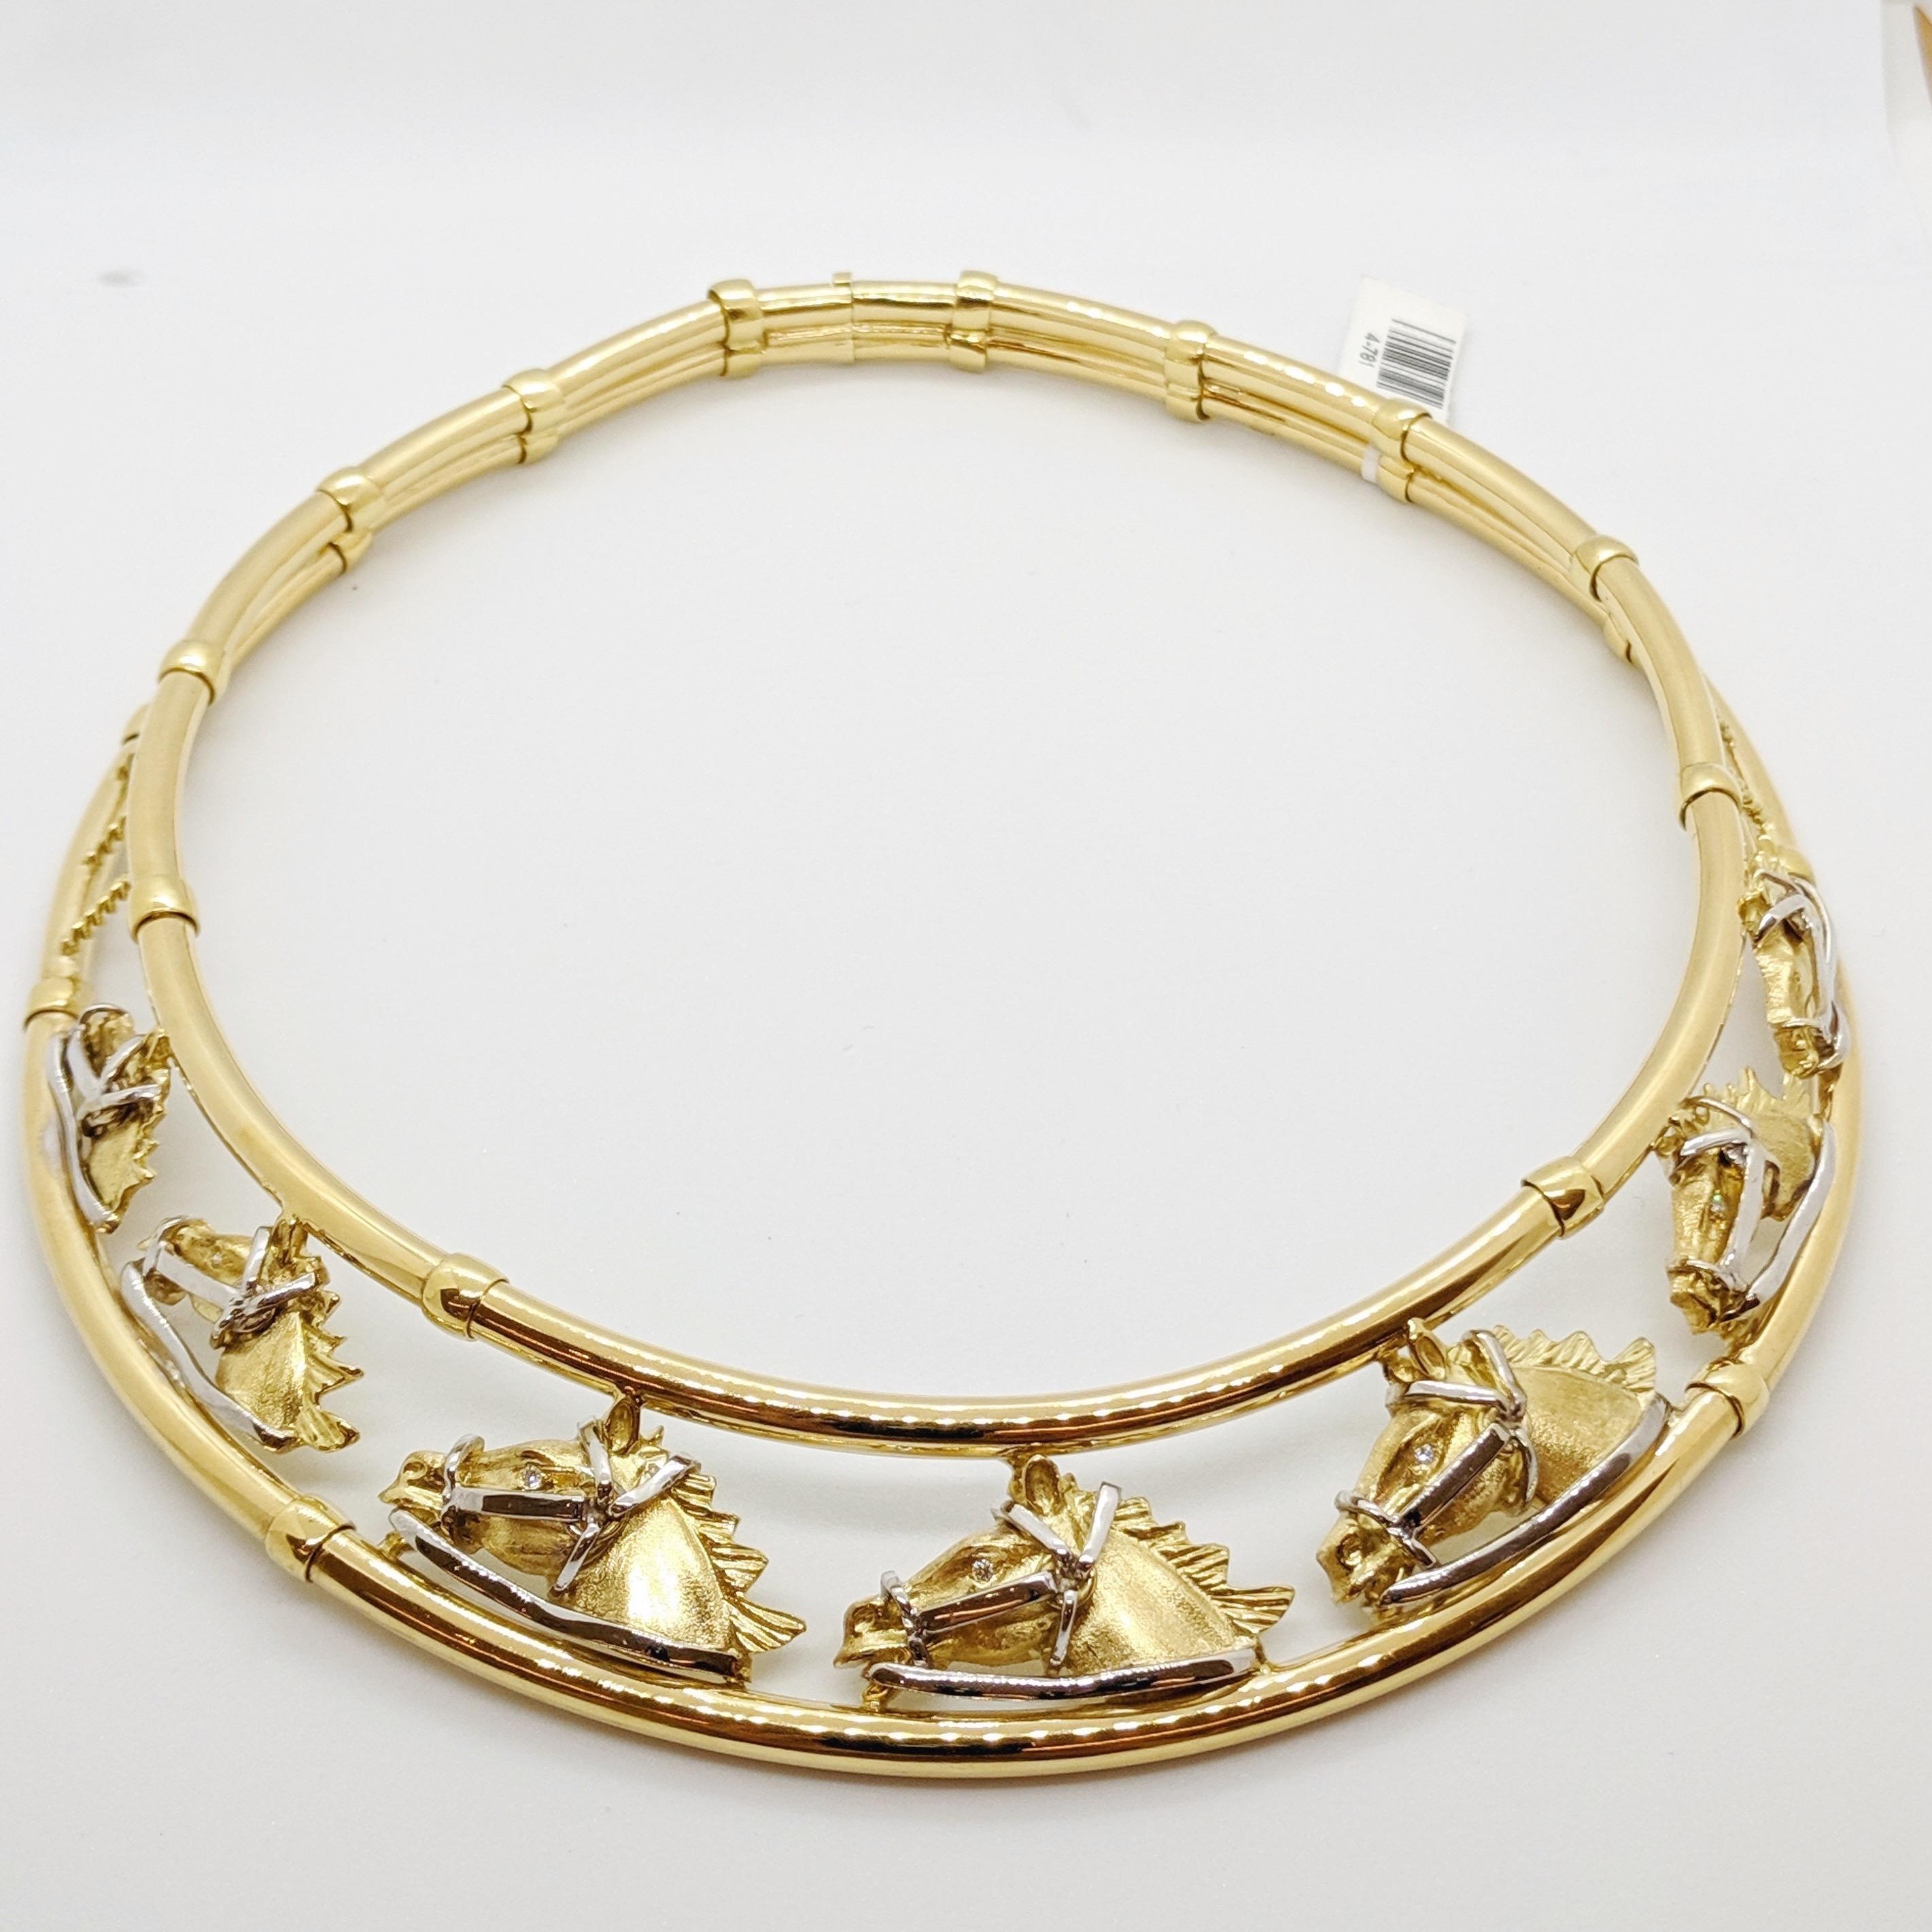 Known for his borderless and romantic imagination Roberto Coin jewelry tells a story through jewels that become works of art. This 18 karat yellow gold collar necklace is a perfect example of his art. Seven graduating horse heads float between two